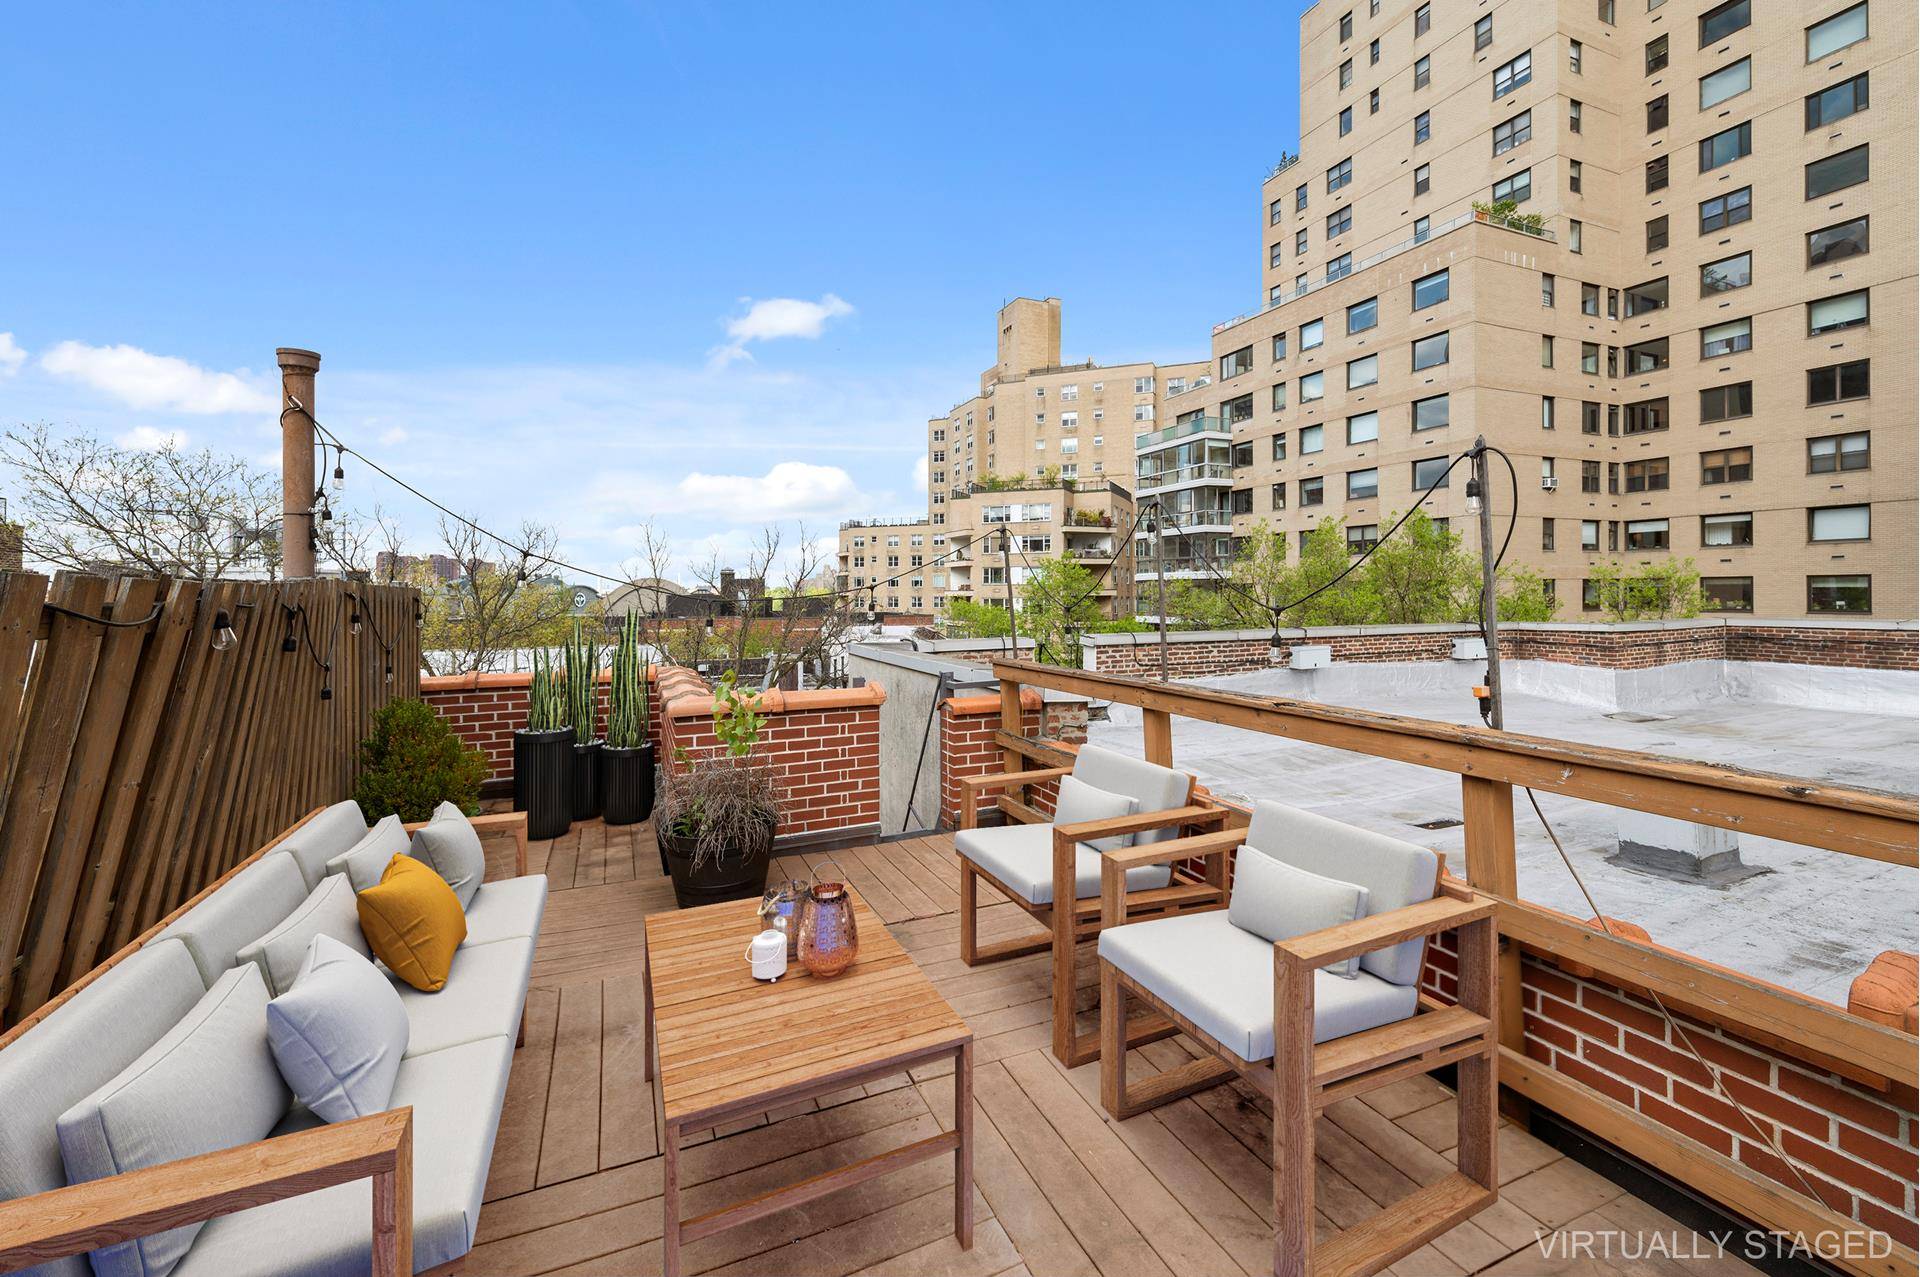 ENJOY YOUR PRIVATE ROOF DECK !